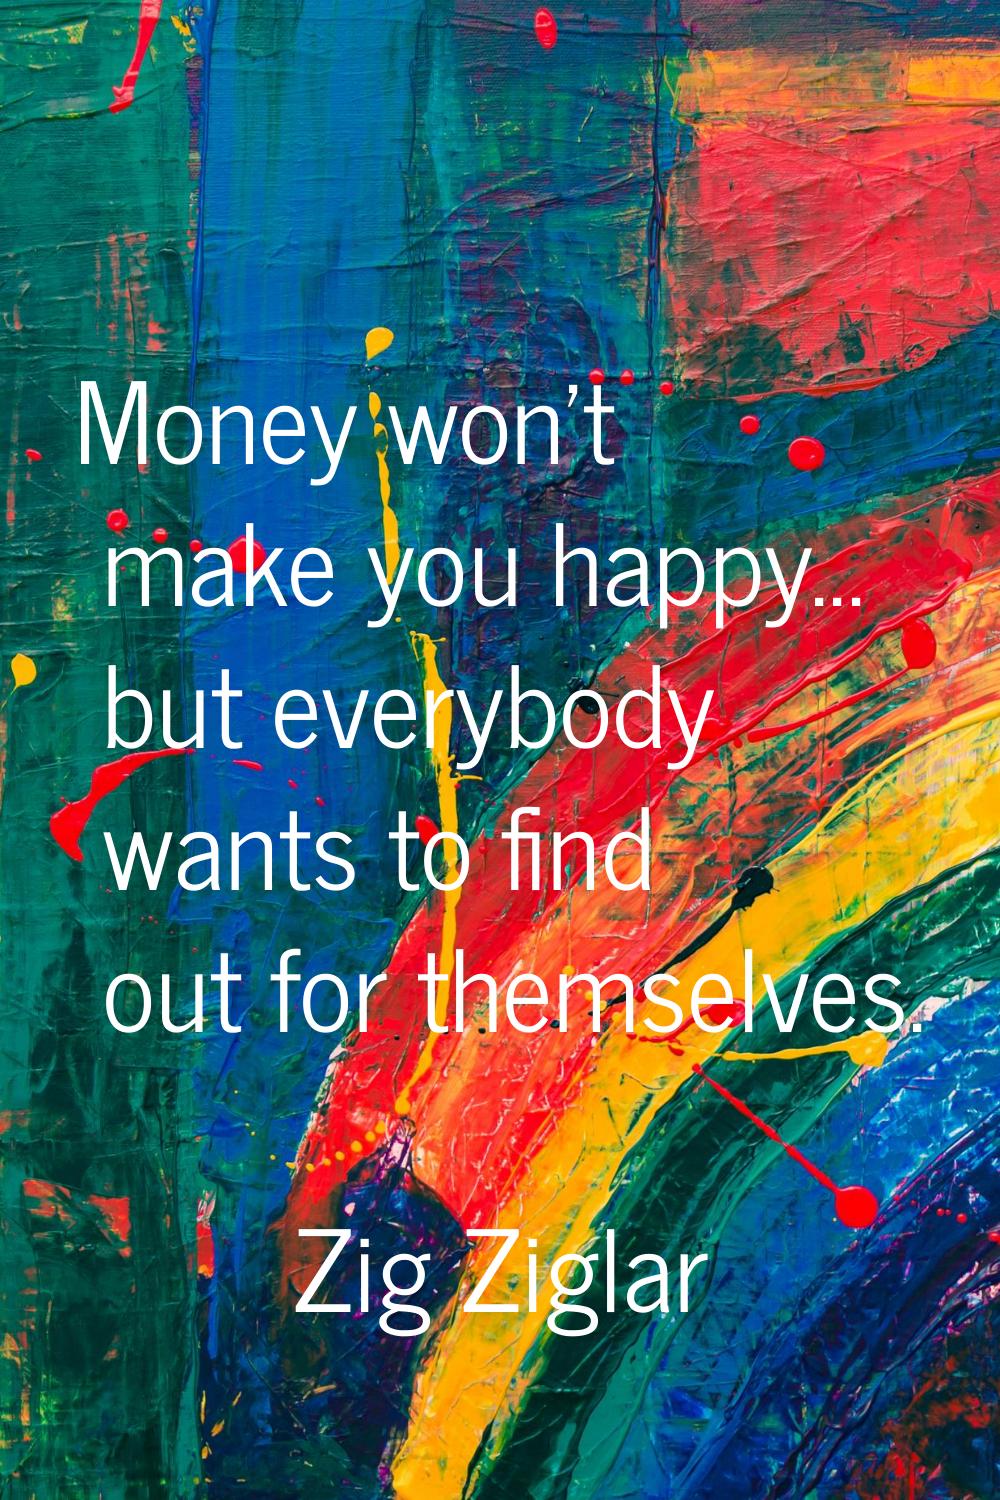 Money won't make you happy... but everybody wants to find out for themselves.